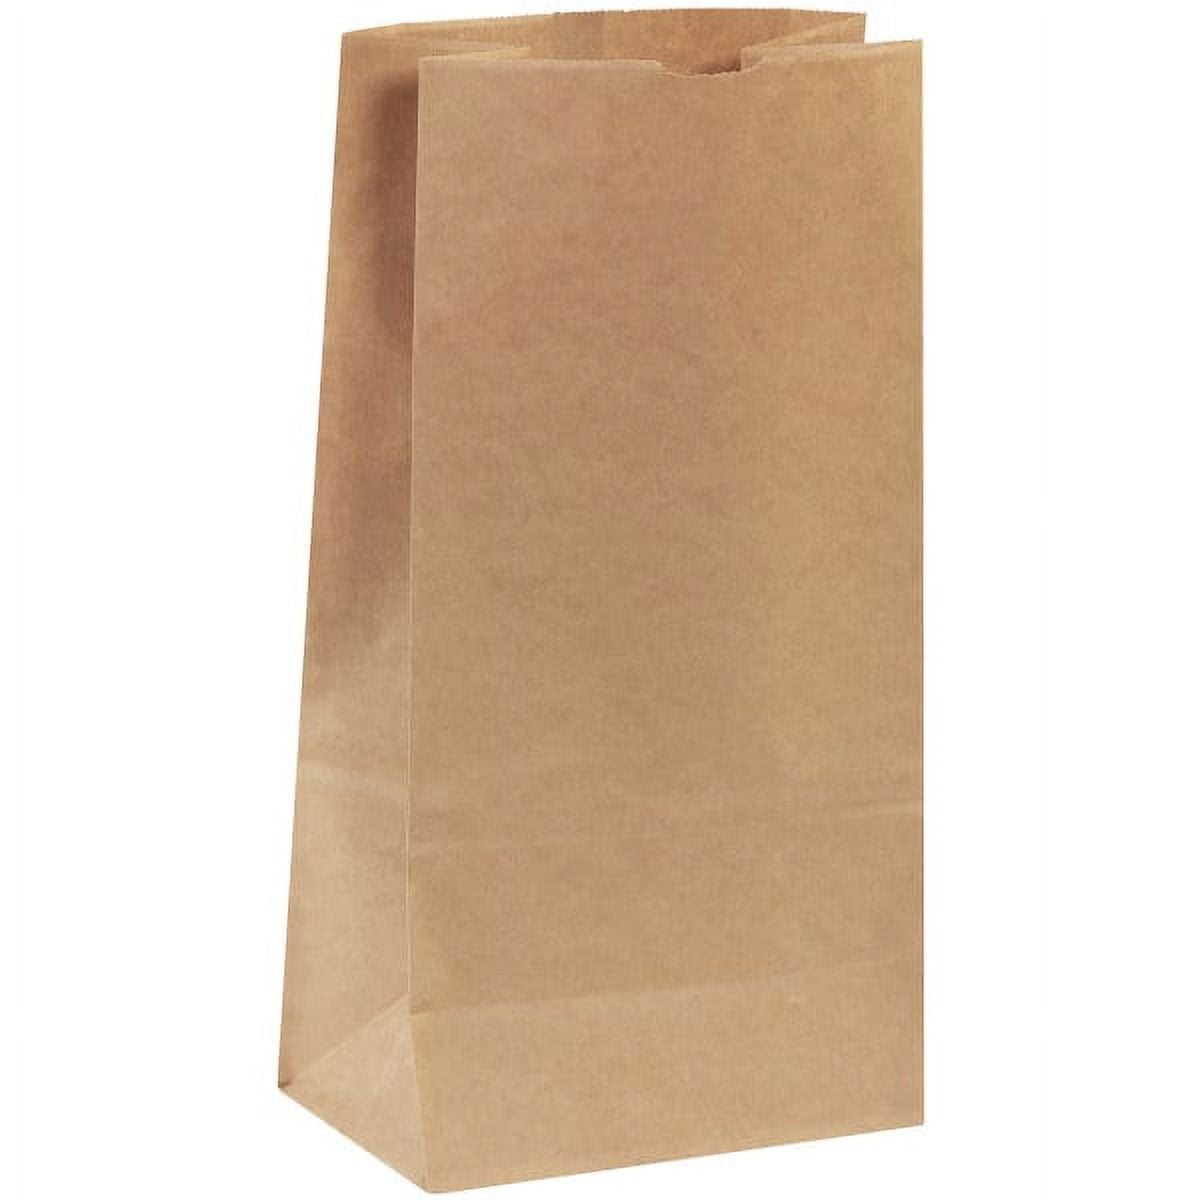 Picture of Box Partners BGH130K Kraft Hardware Bags - 8.25 x 5.321 x 16.125 in.